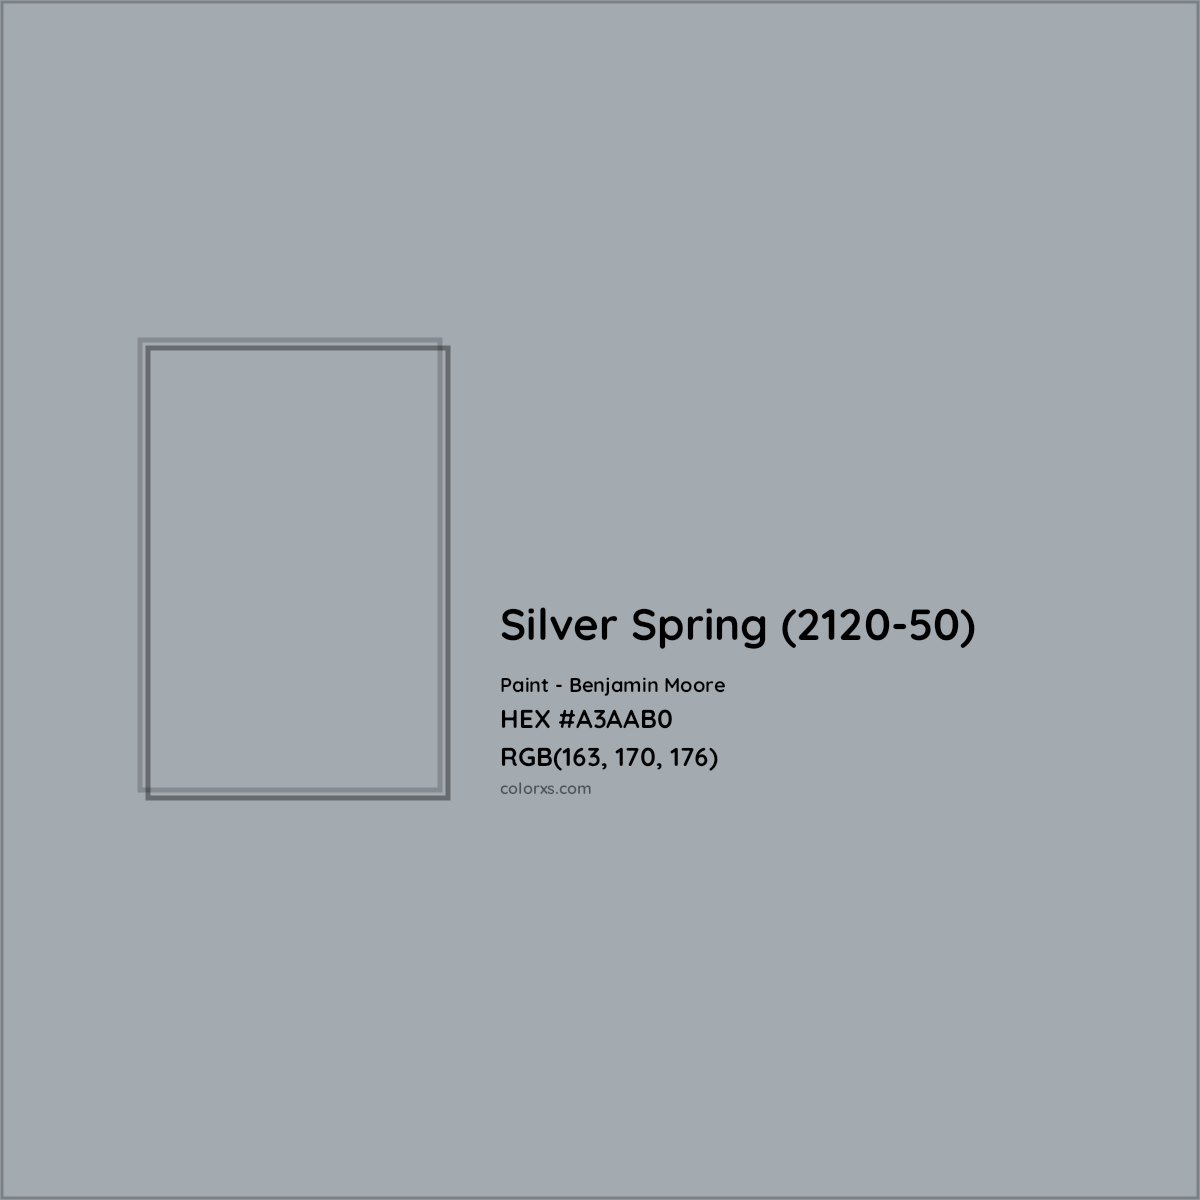 HEX #A3AAB0 Silver Spring (2120-50) Paint Benjamin Moore - Color Code